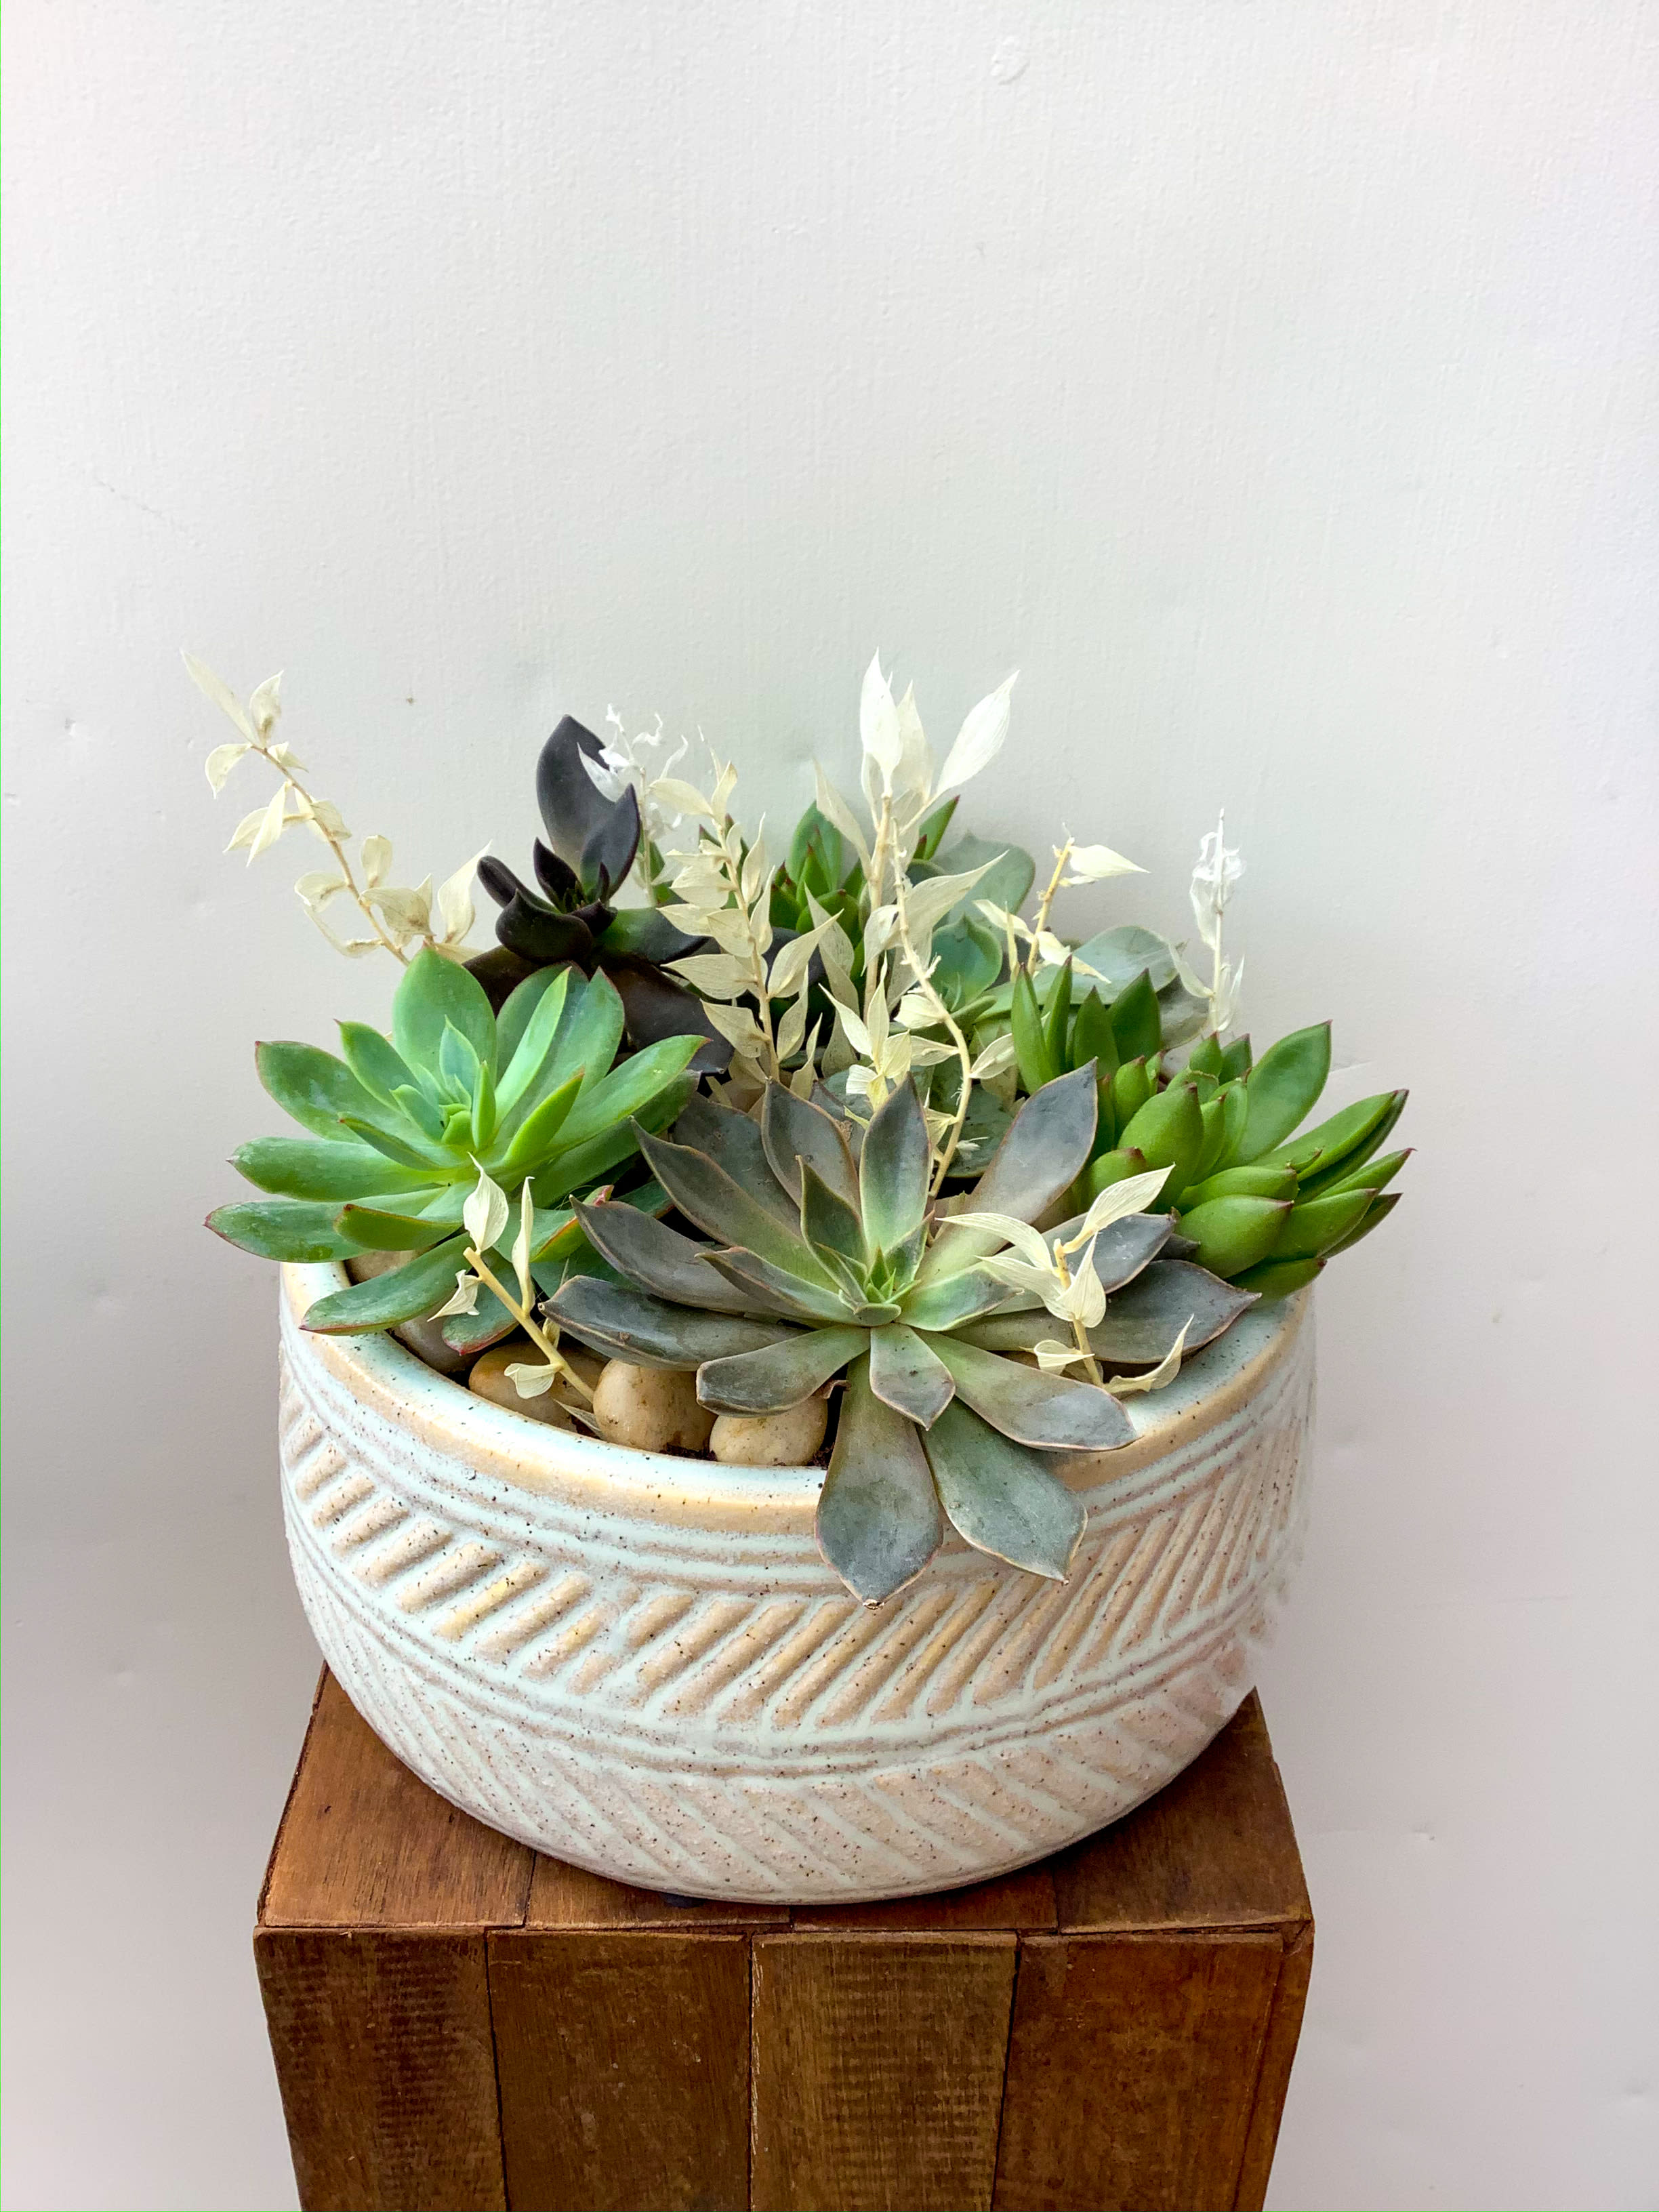 Succulent Dish Garden - Order this succulent dish garden to brighten up a coworker’s or friend’s day!